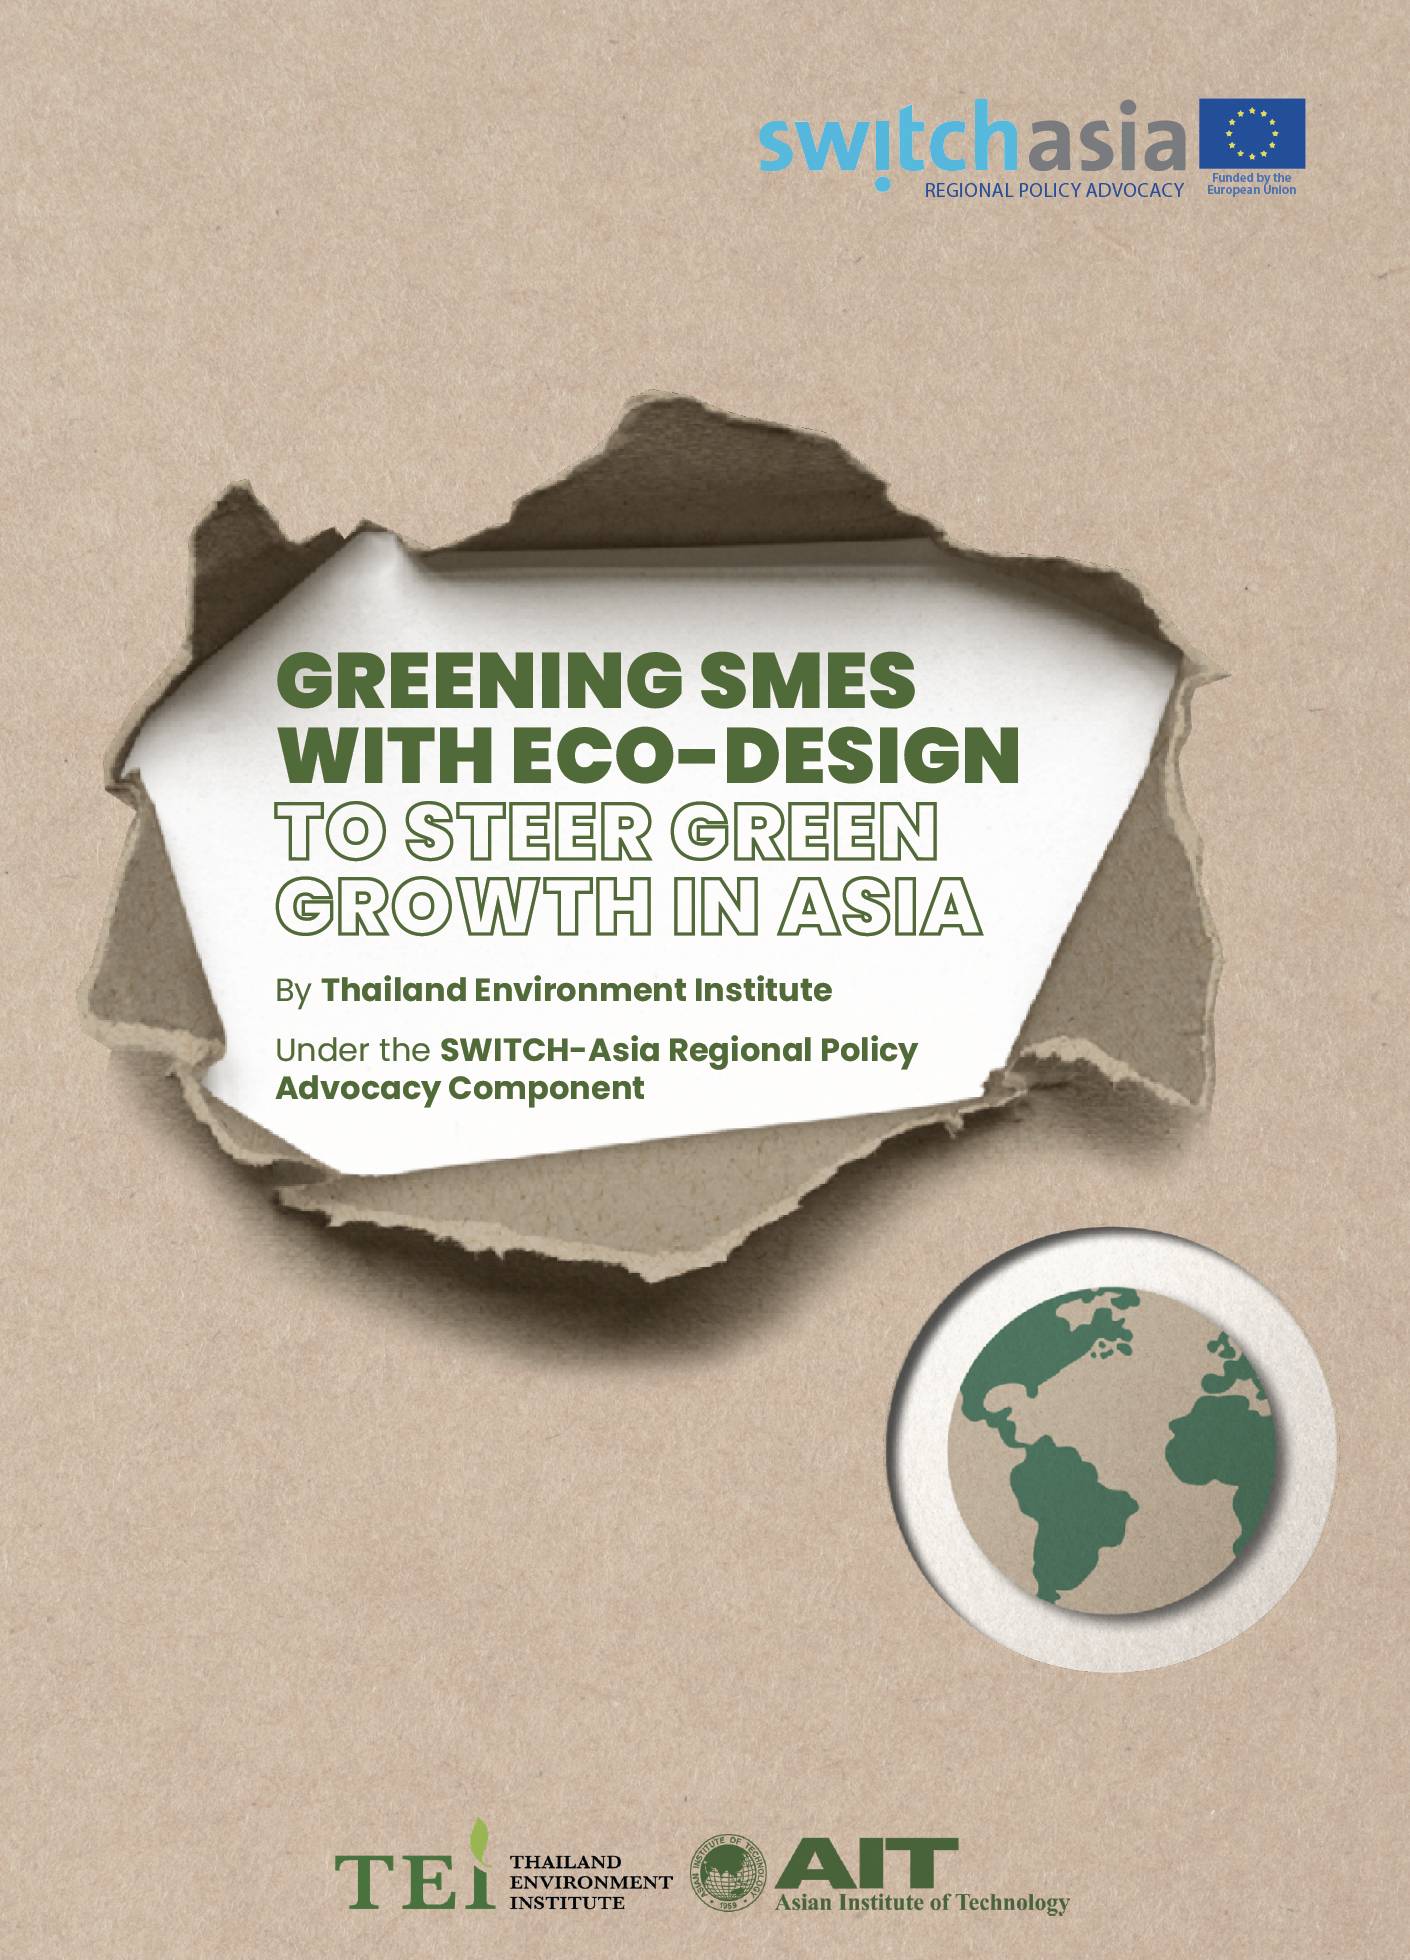 Greening SMEs with Eco-design to Steer Green Growth in Asia